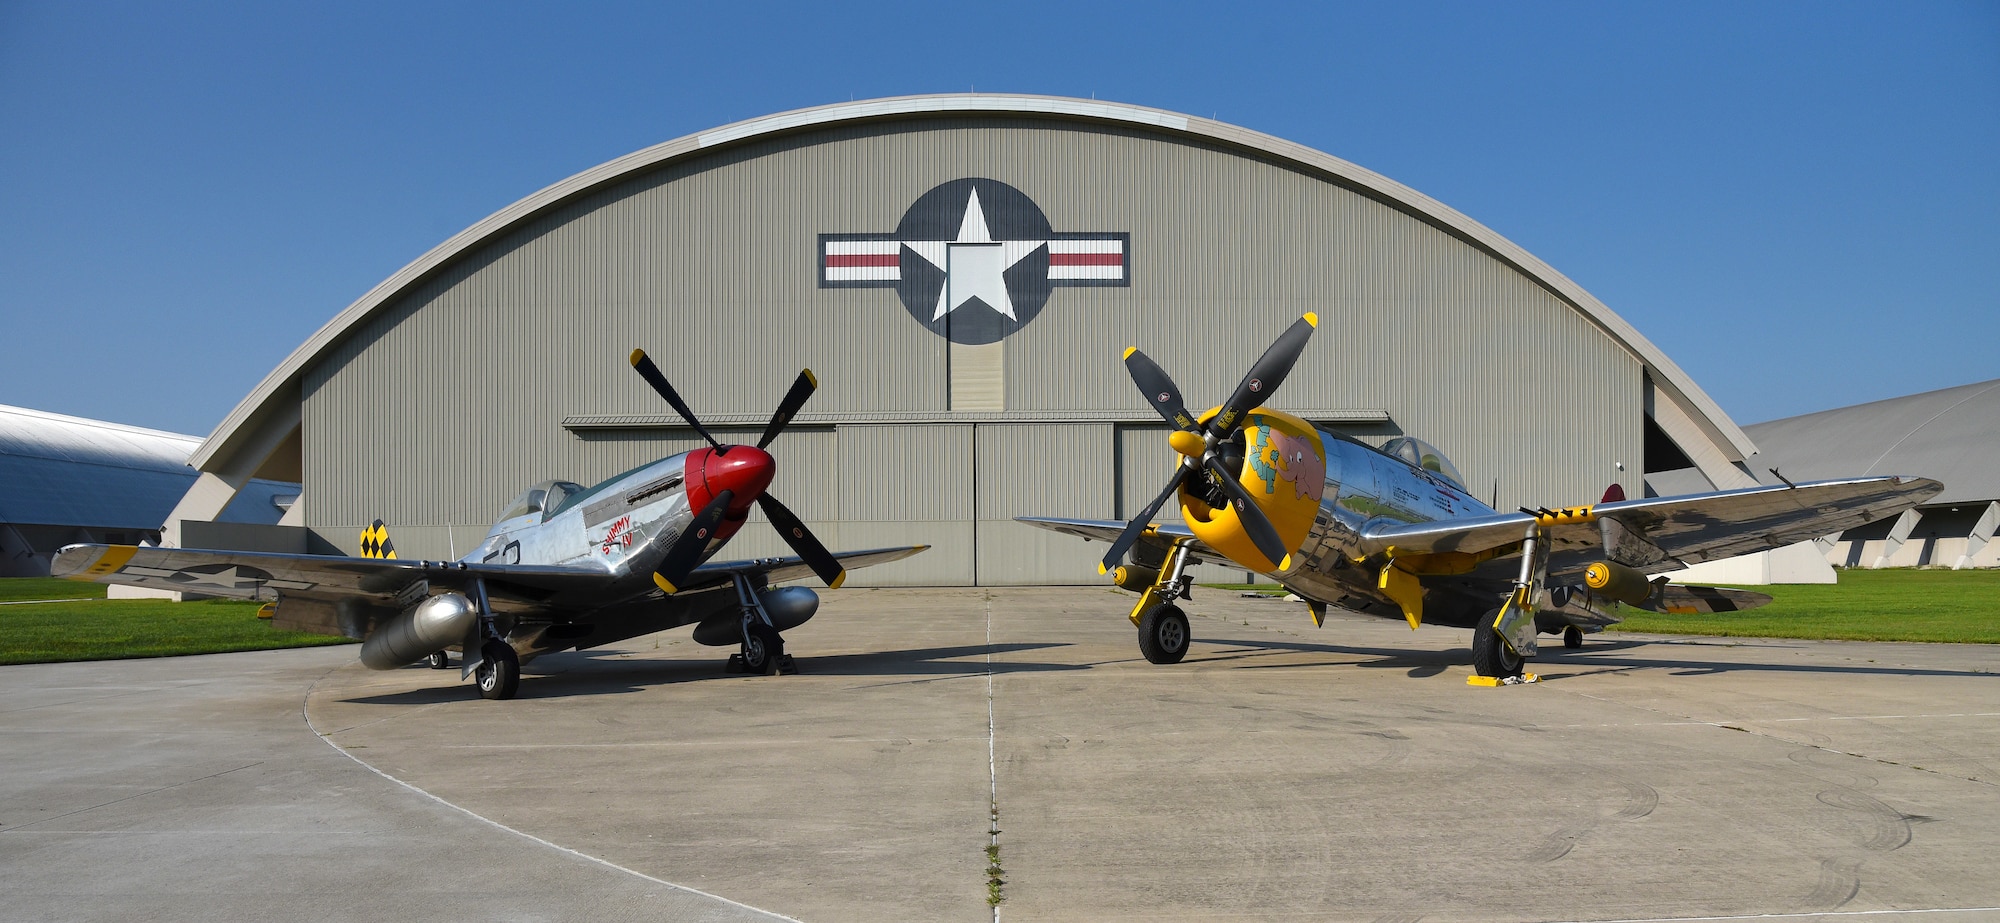 A view of the North American P-51D Mustang and the Republic P-47D (Bubble Canopy Version) before restoration crews at the National Museum of the U.S. Air Force moved the aircraft into the WWII Gallery on Aug. 14, 2018. Several WWII era aircraft on display were temporarily placed throughout the museum to provide adequate space for the Memphis Belle exhibit opening events. (U.S. Air Force photo by Ken LaRock)